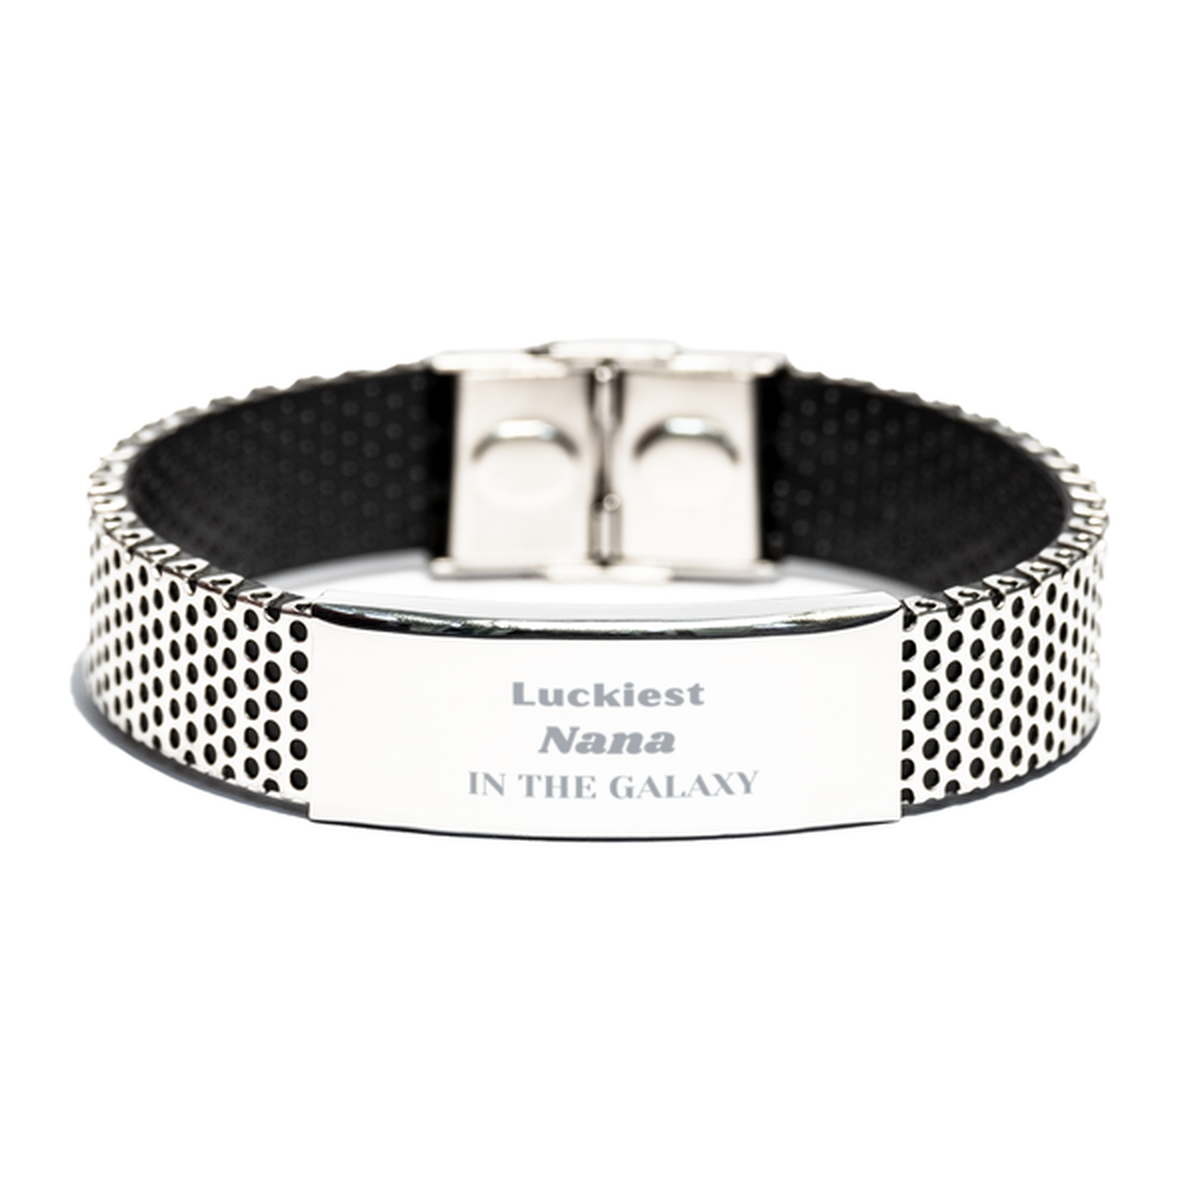 Luckiest Nana in the Galaxy, To My Nana Engraved Gifts, Christmas Nana Stainless Steel Bracelet Gifts, X-mas Birthday Unique Gifts For Nana Men Women